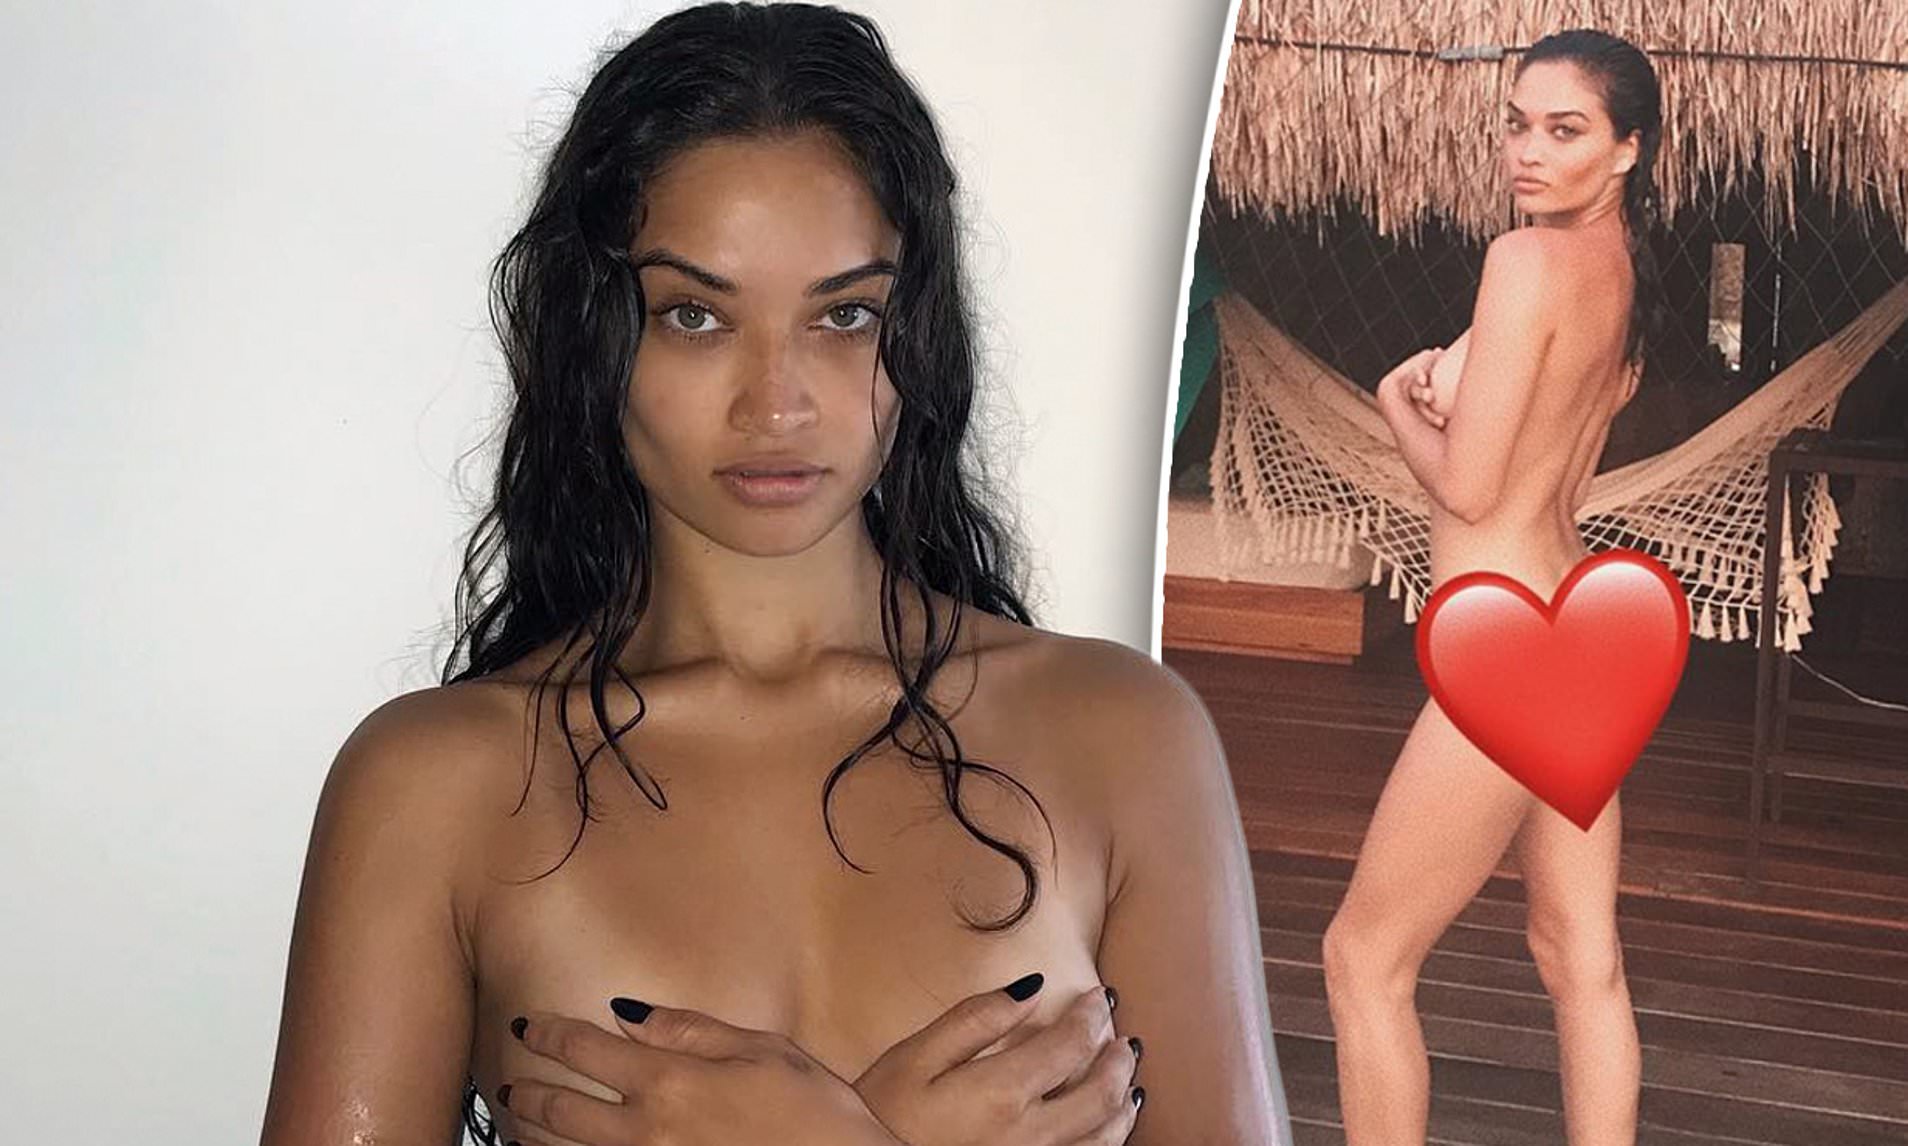 candy ralston recommends shanina shaik nude pic